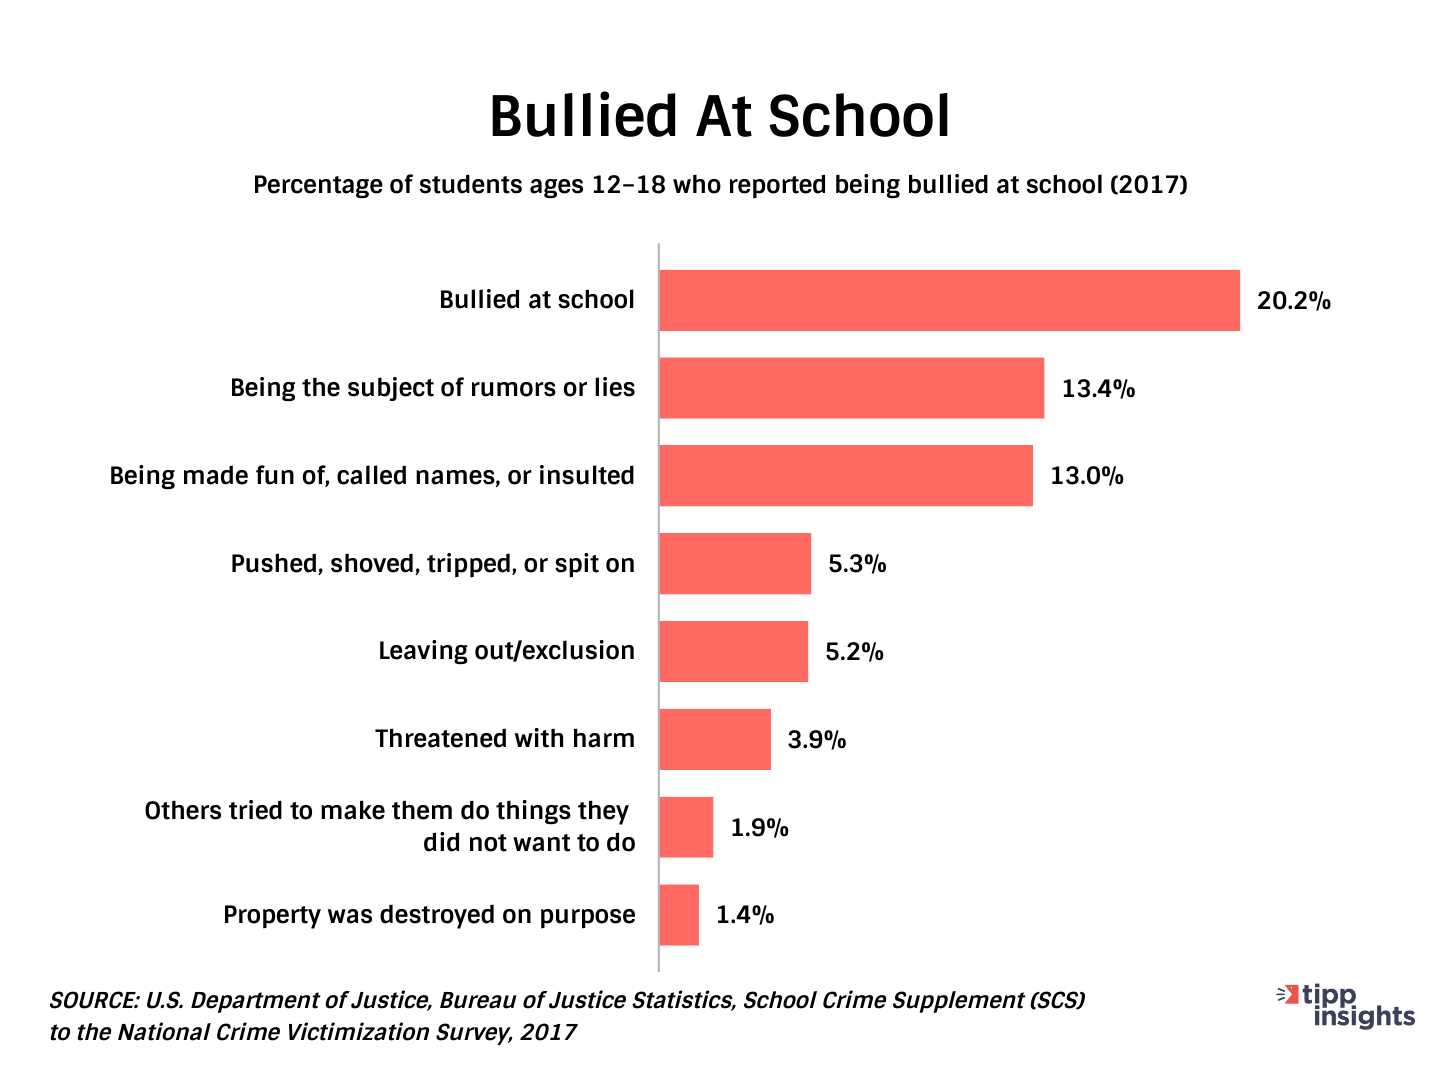 U.S Department of Justice poll in 2017 kids Bullied at school